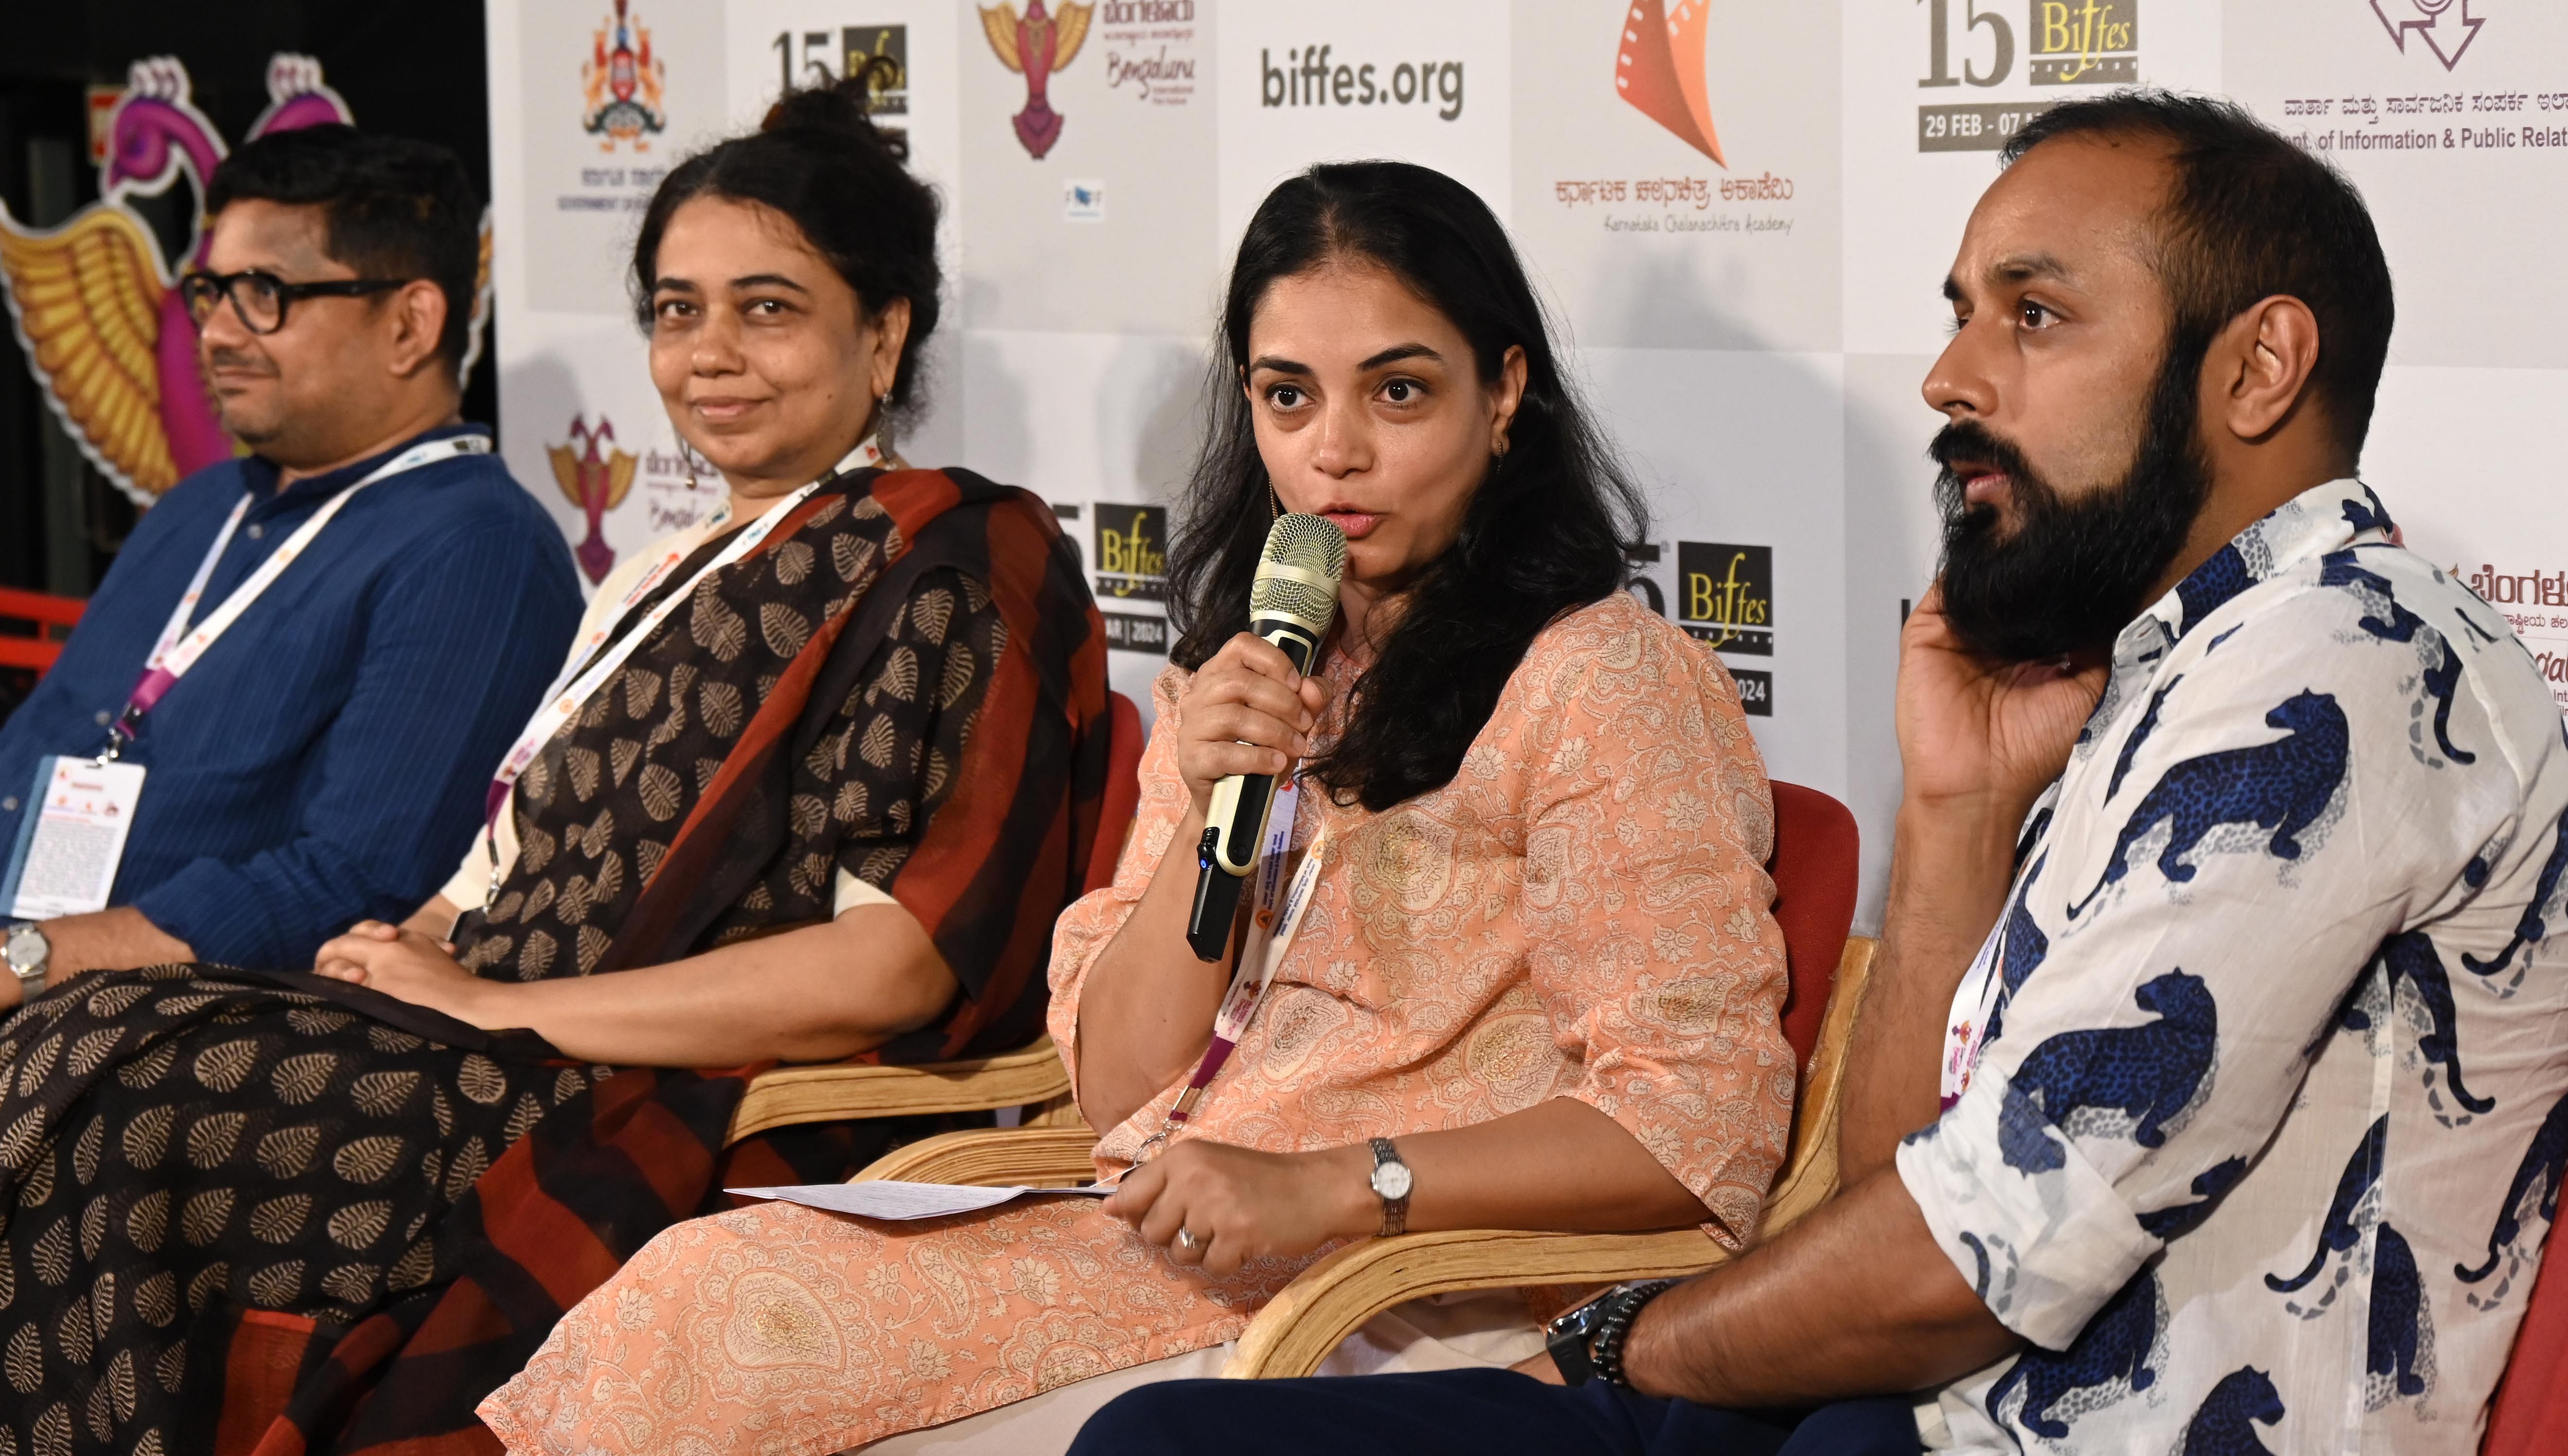 <div class="paragraphs"><p>Documentary filmmakers Anirban Dutta, Anupama Srinivasan and Sandhya Kumar (moderator) participate in a panel discussion on ‘The Documentary Cinema in Contemporary Times’ at the Bengaluru International Film Festival in Bengaluru on Wednesday. </p></div>